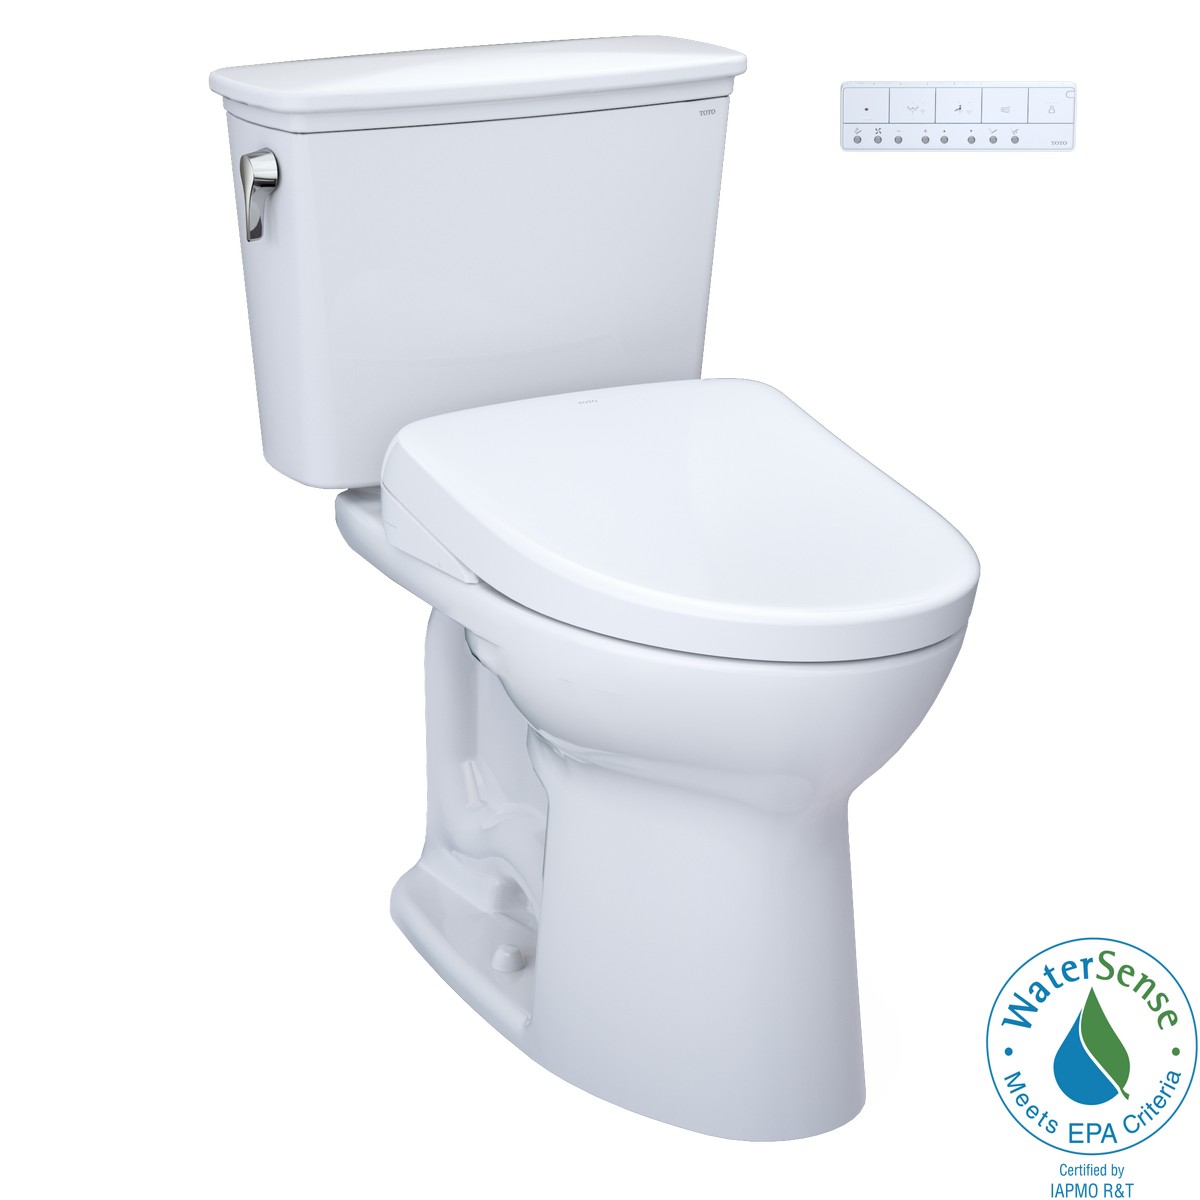 TOTO MW7864726CEF.10#01 DRAKE TRANSITIONAL WASHLET+ 1.28 GPF TWO PIECE 10 INCH ROUGH-IN ELONGATED UNIVERSAL HEIGHT TORNADO FLUSH TOILET WITH WASHLET S7 BIDET SEAT IN COTTON WHITE